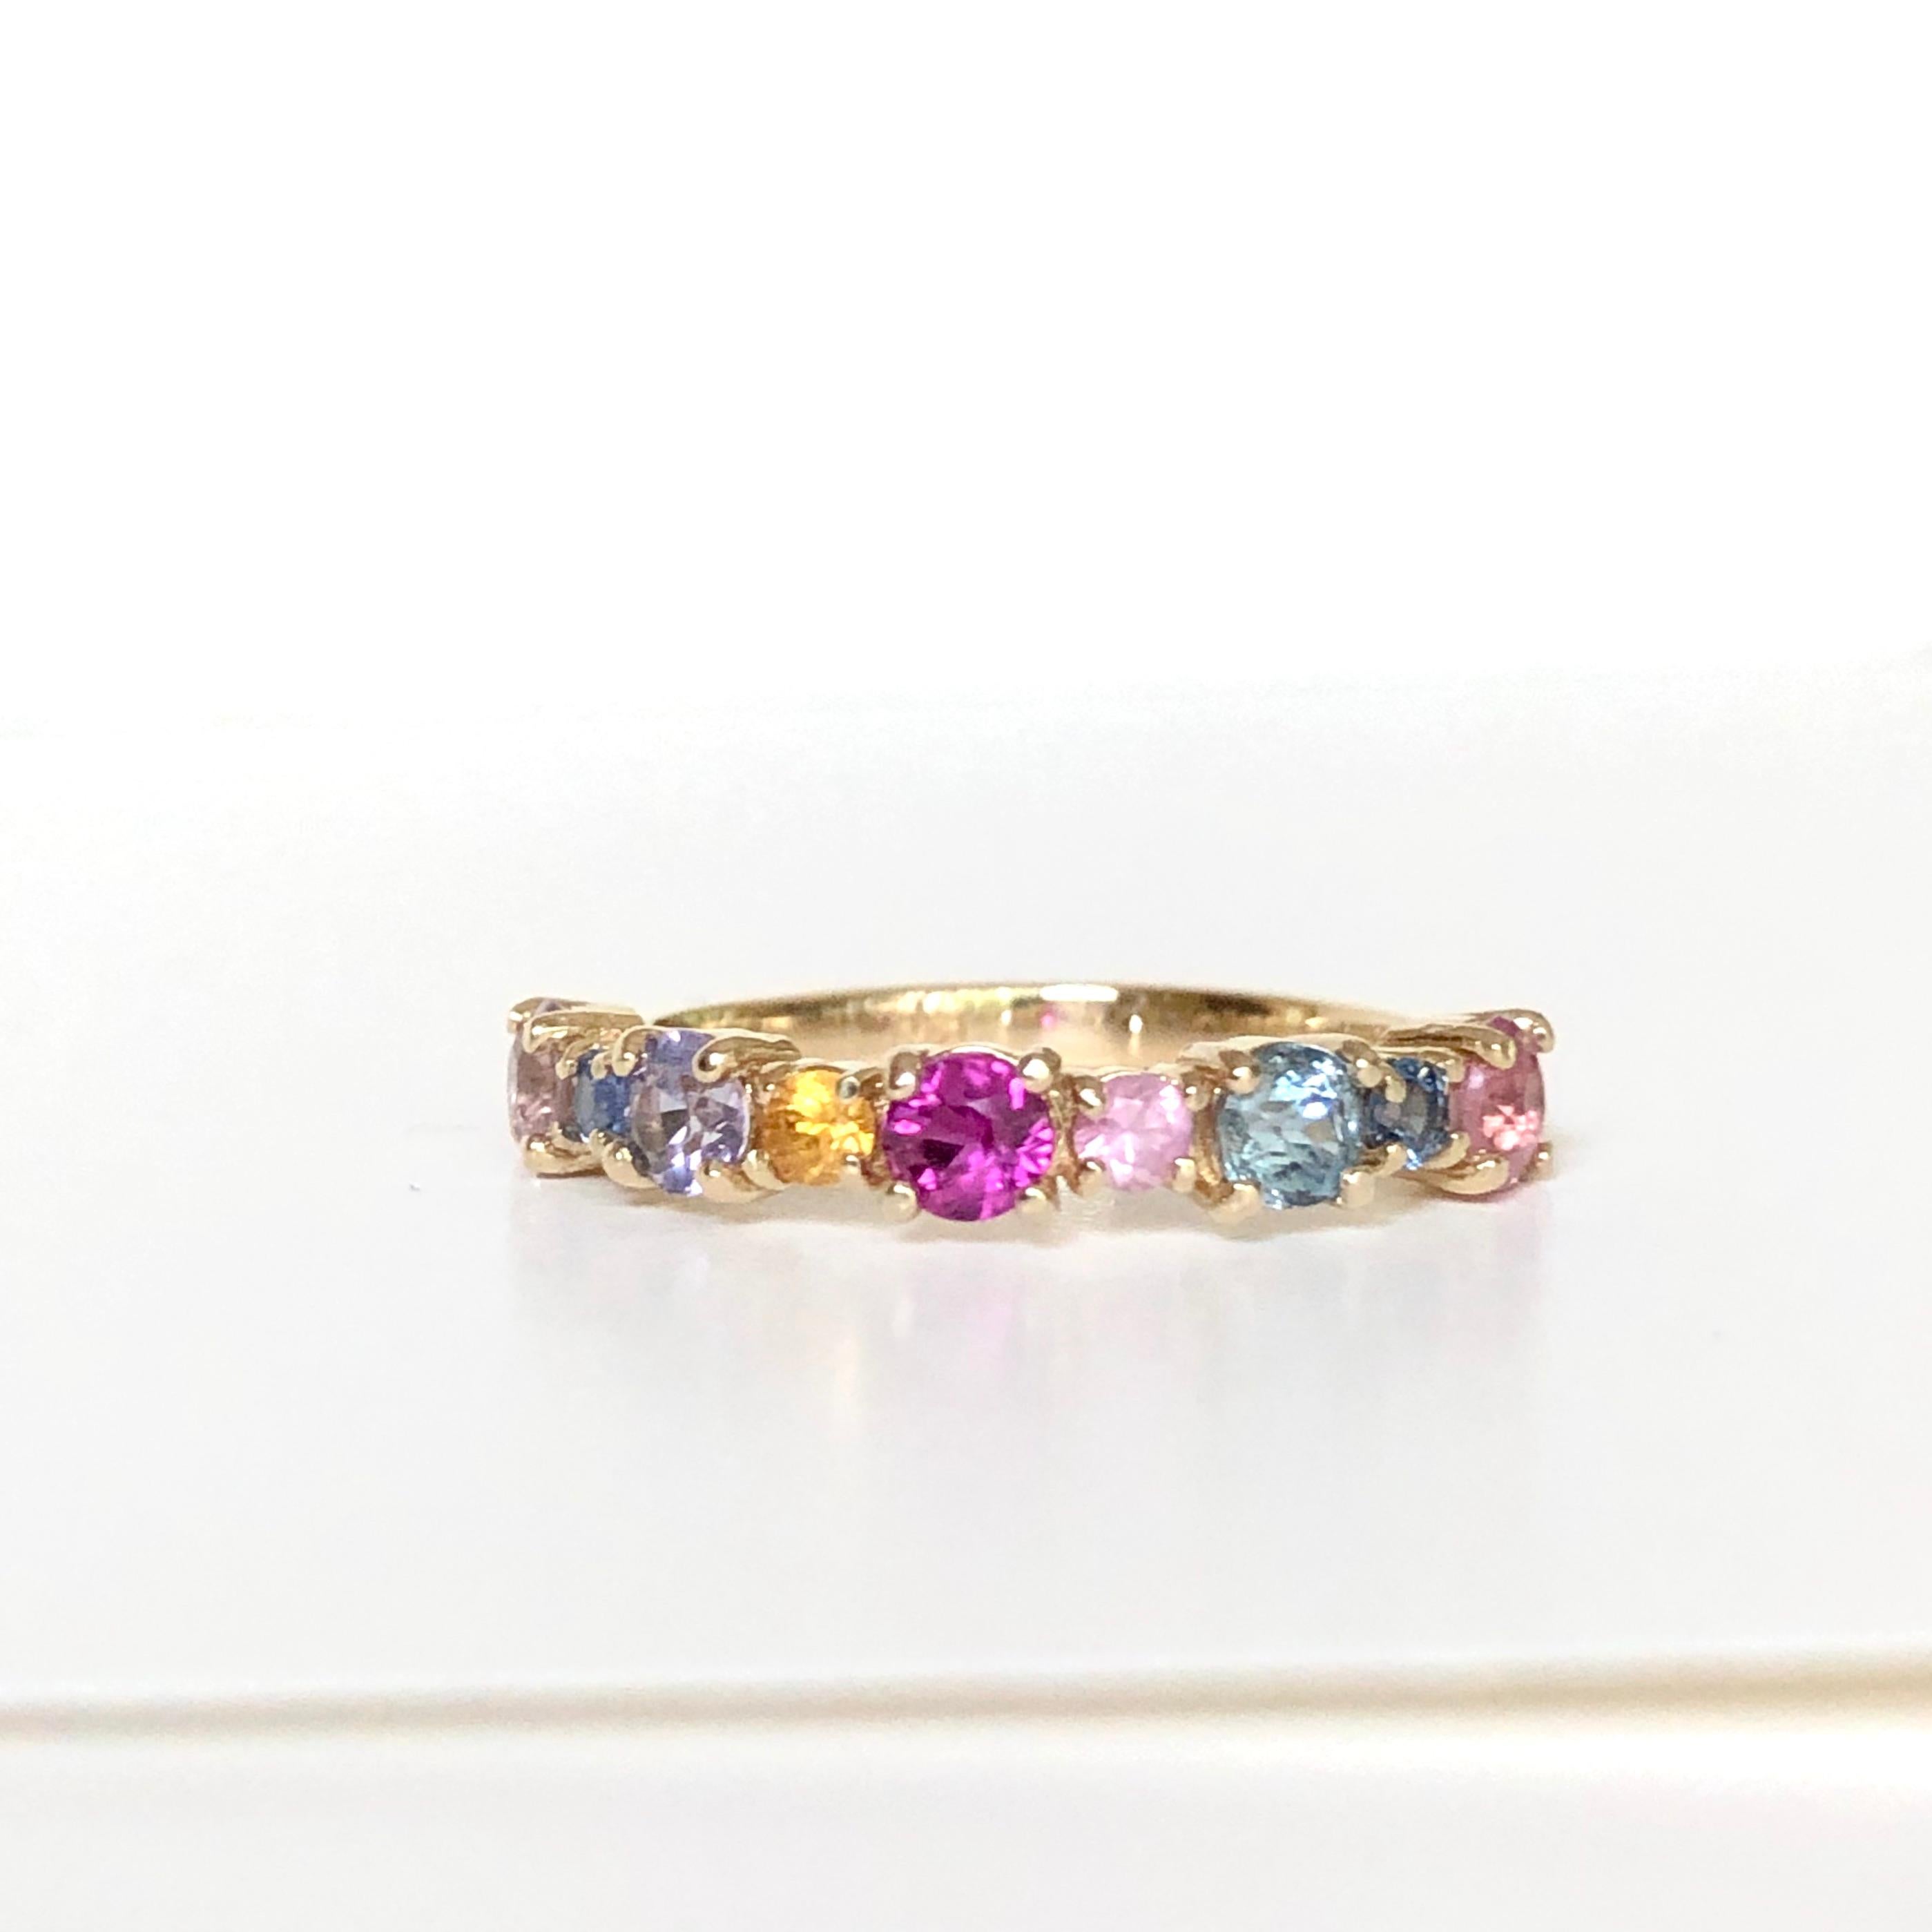 Beautiful round brilliant cut multi color natural sapphire with a half circle of round multi color candy sapphires 100% natural, weighing approx. 1.00 carat. This fabulous band is fashioned in 14K yellow gold mounting and 100% natural